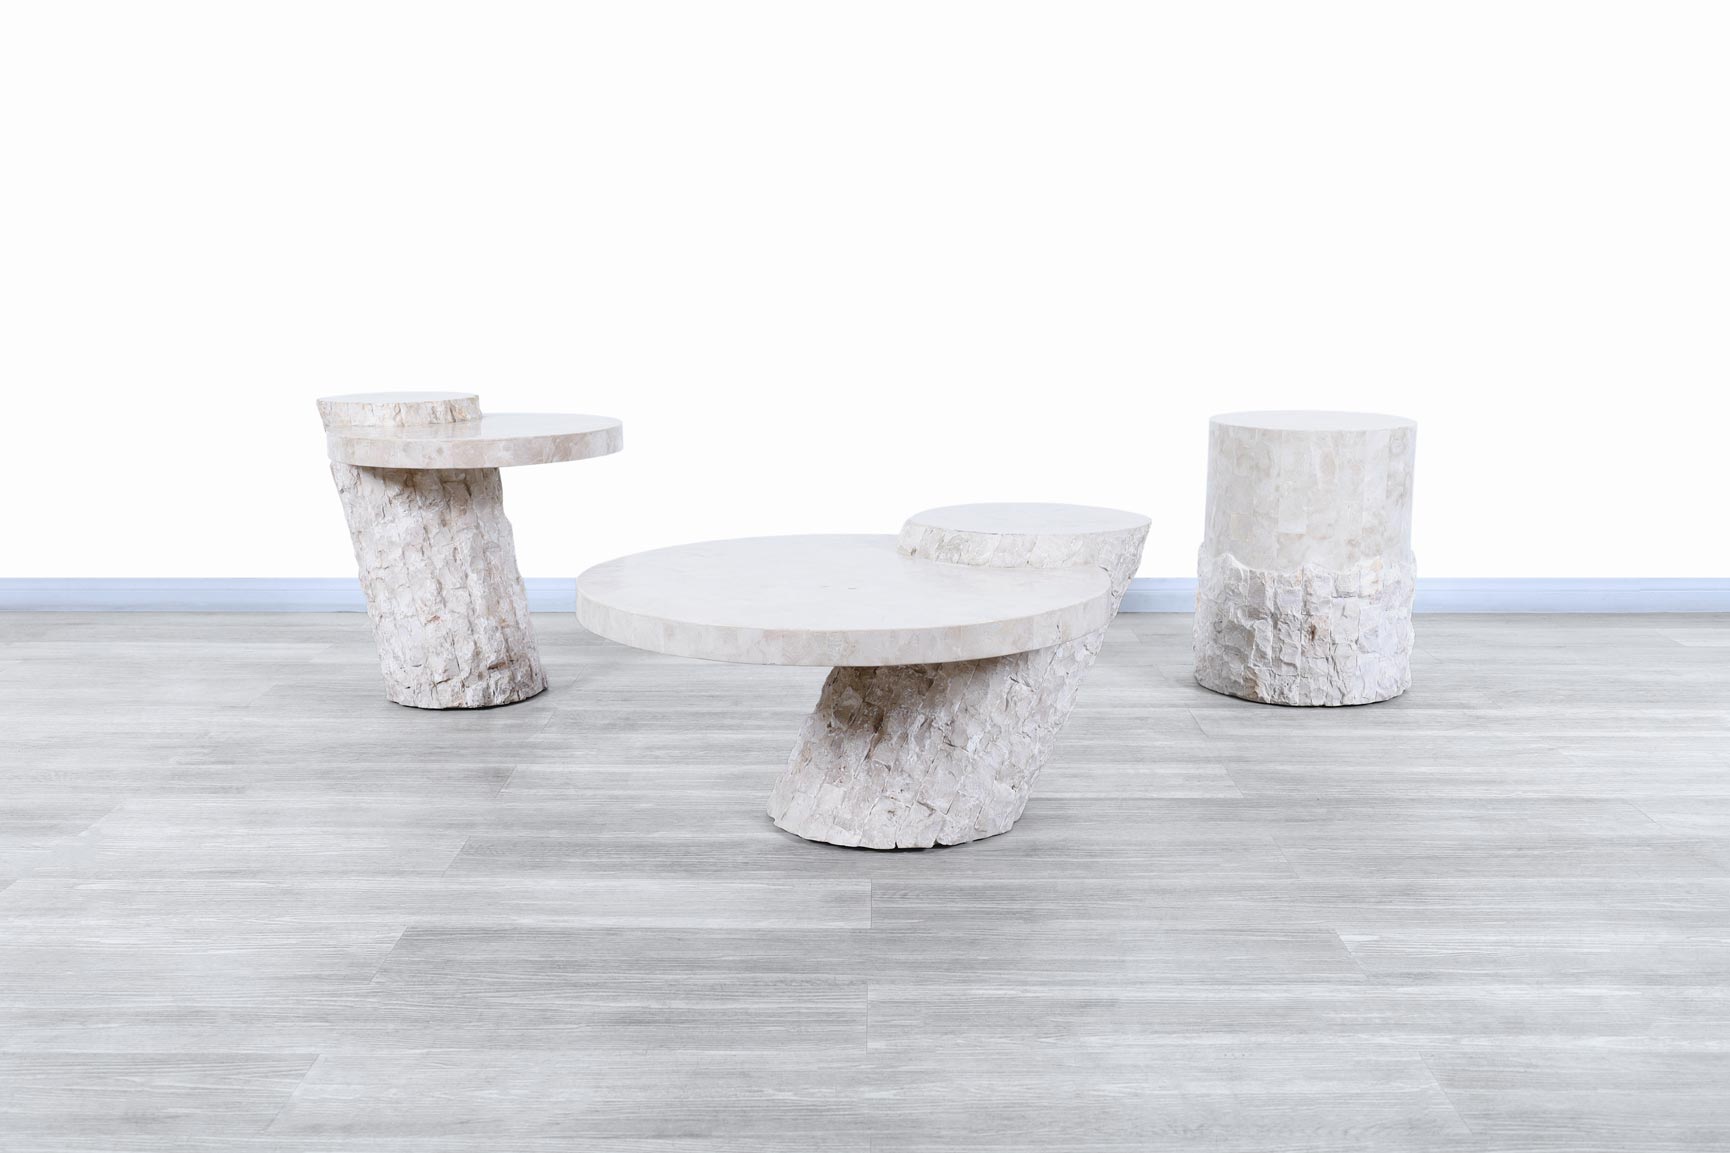 Vintage Tessellated Stone Coffee Table and Side Tables